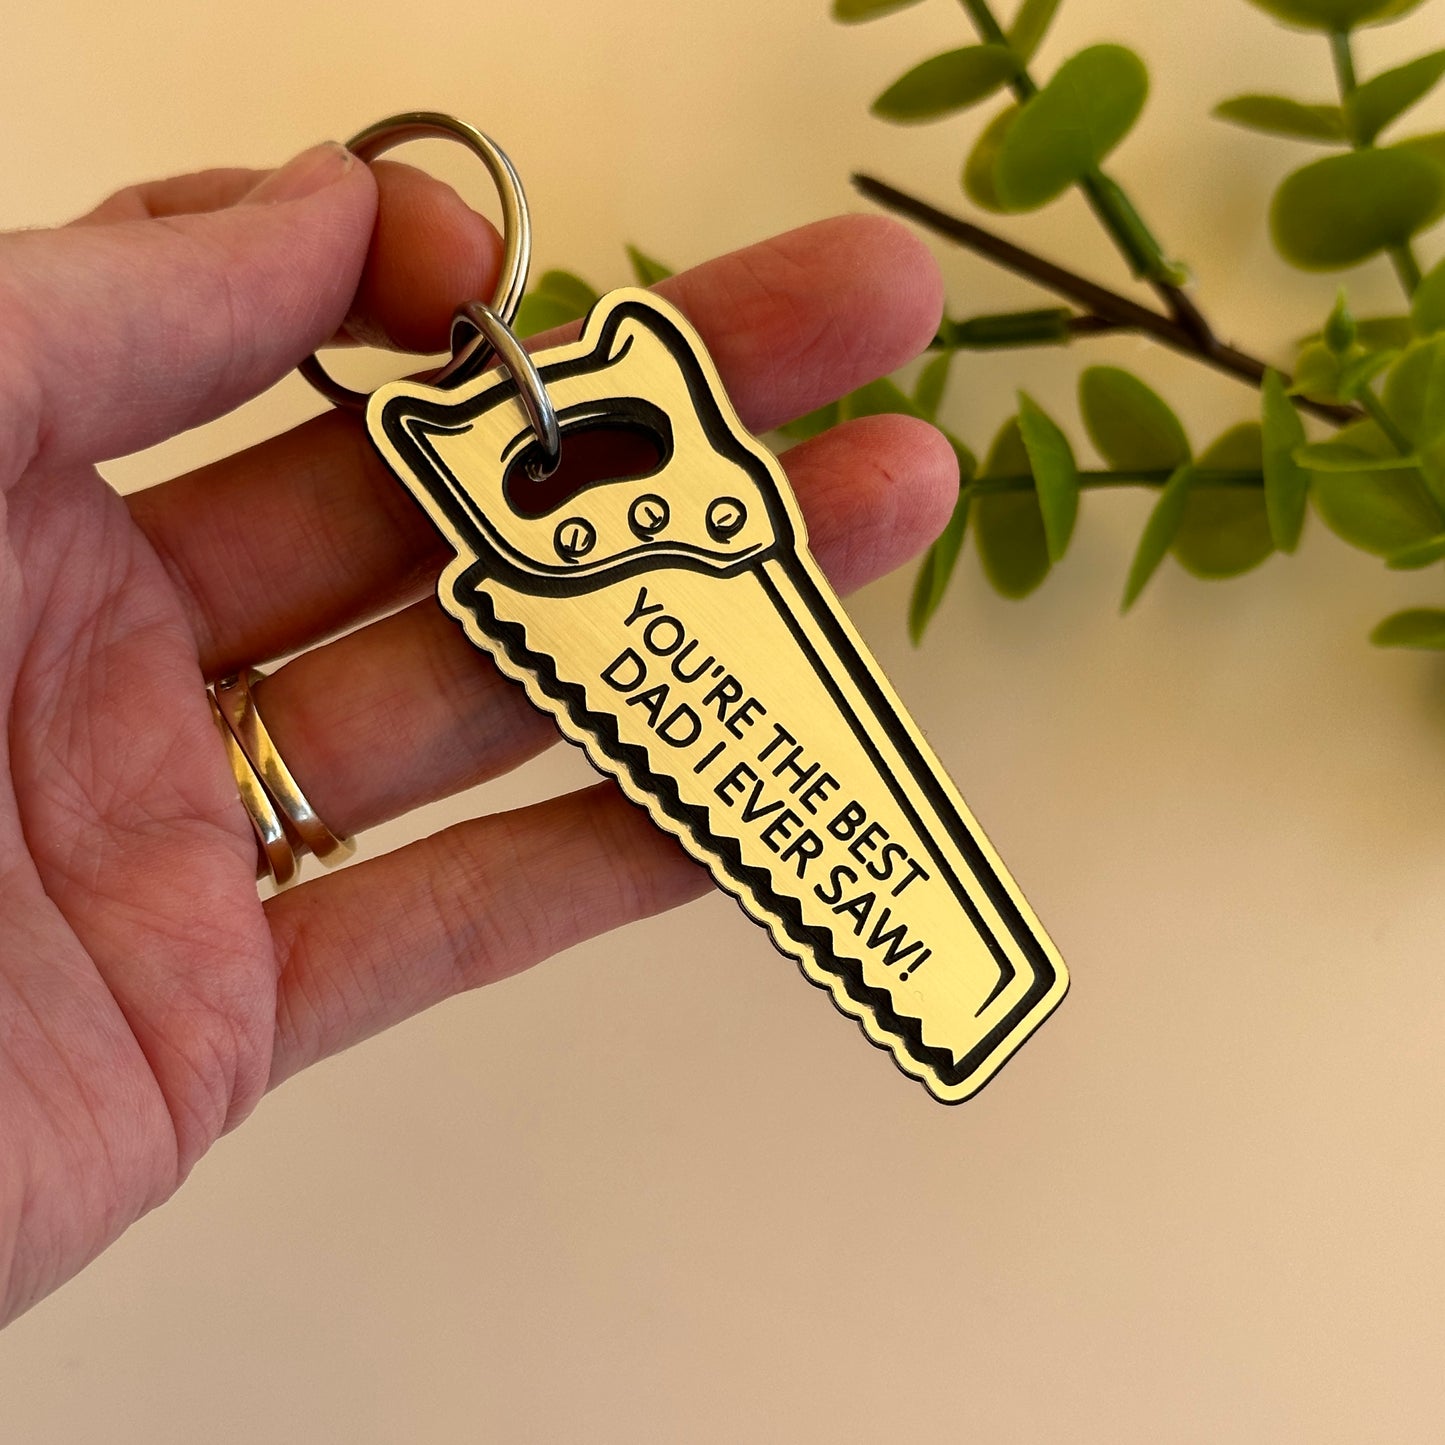 Fathers Day Keyring | Dad Keyring | Fathers Day Gift | Best Dad I Ever Saw